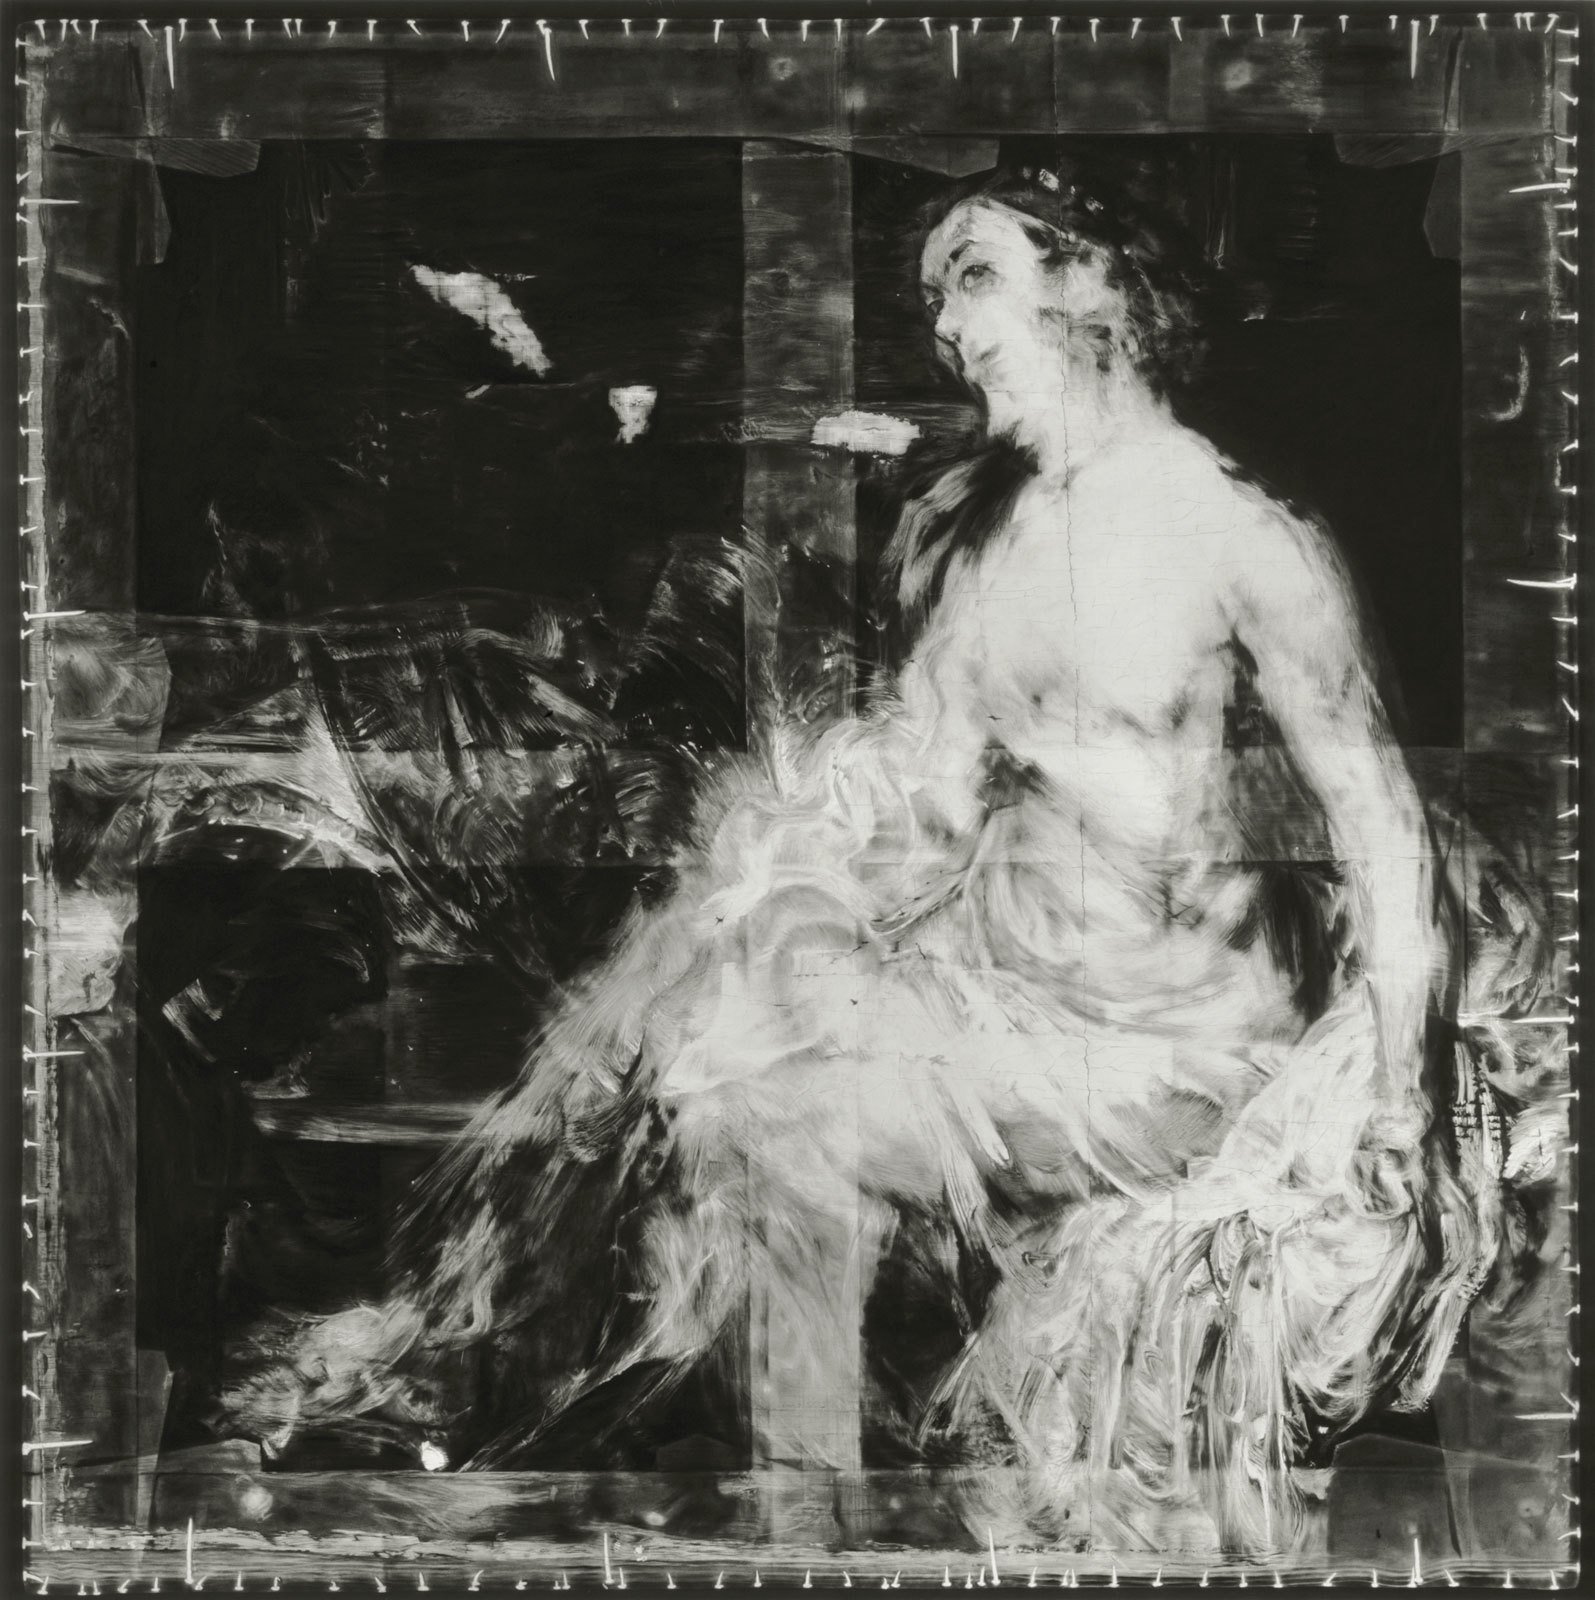 Untitled (X-Ray of Bathsheba at Her&nbsp;Bath, 1654, After Rembrandt), 2015-2016.&nbsp;Charcoal on mounted paper, 70 x&nbsp;70 inches (177.8 x 177.8 cm).&nbsp;Courtesy&nbsp;of the artist and Galerie Thaddaeus&nbsp;Ropac; London, Paris, Salzburg.